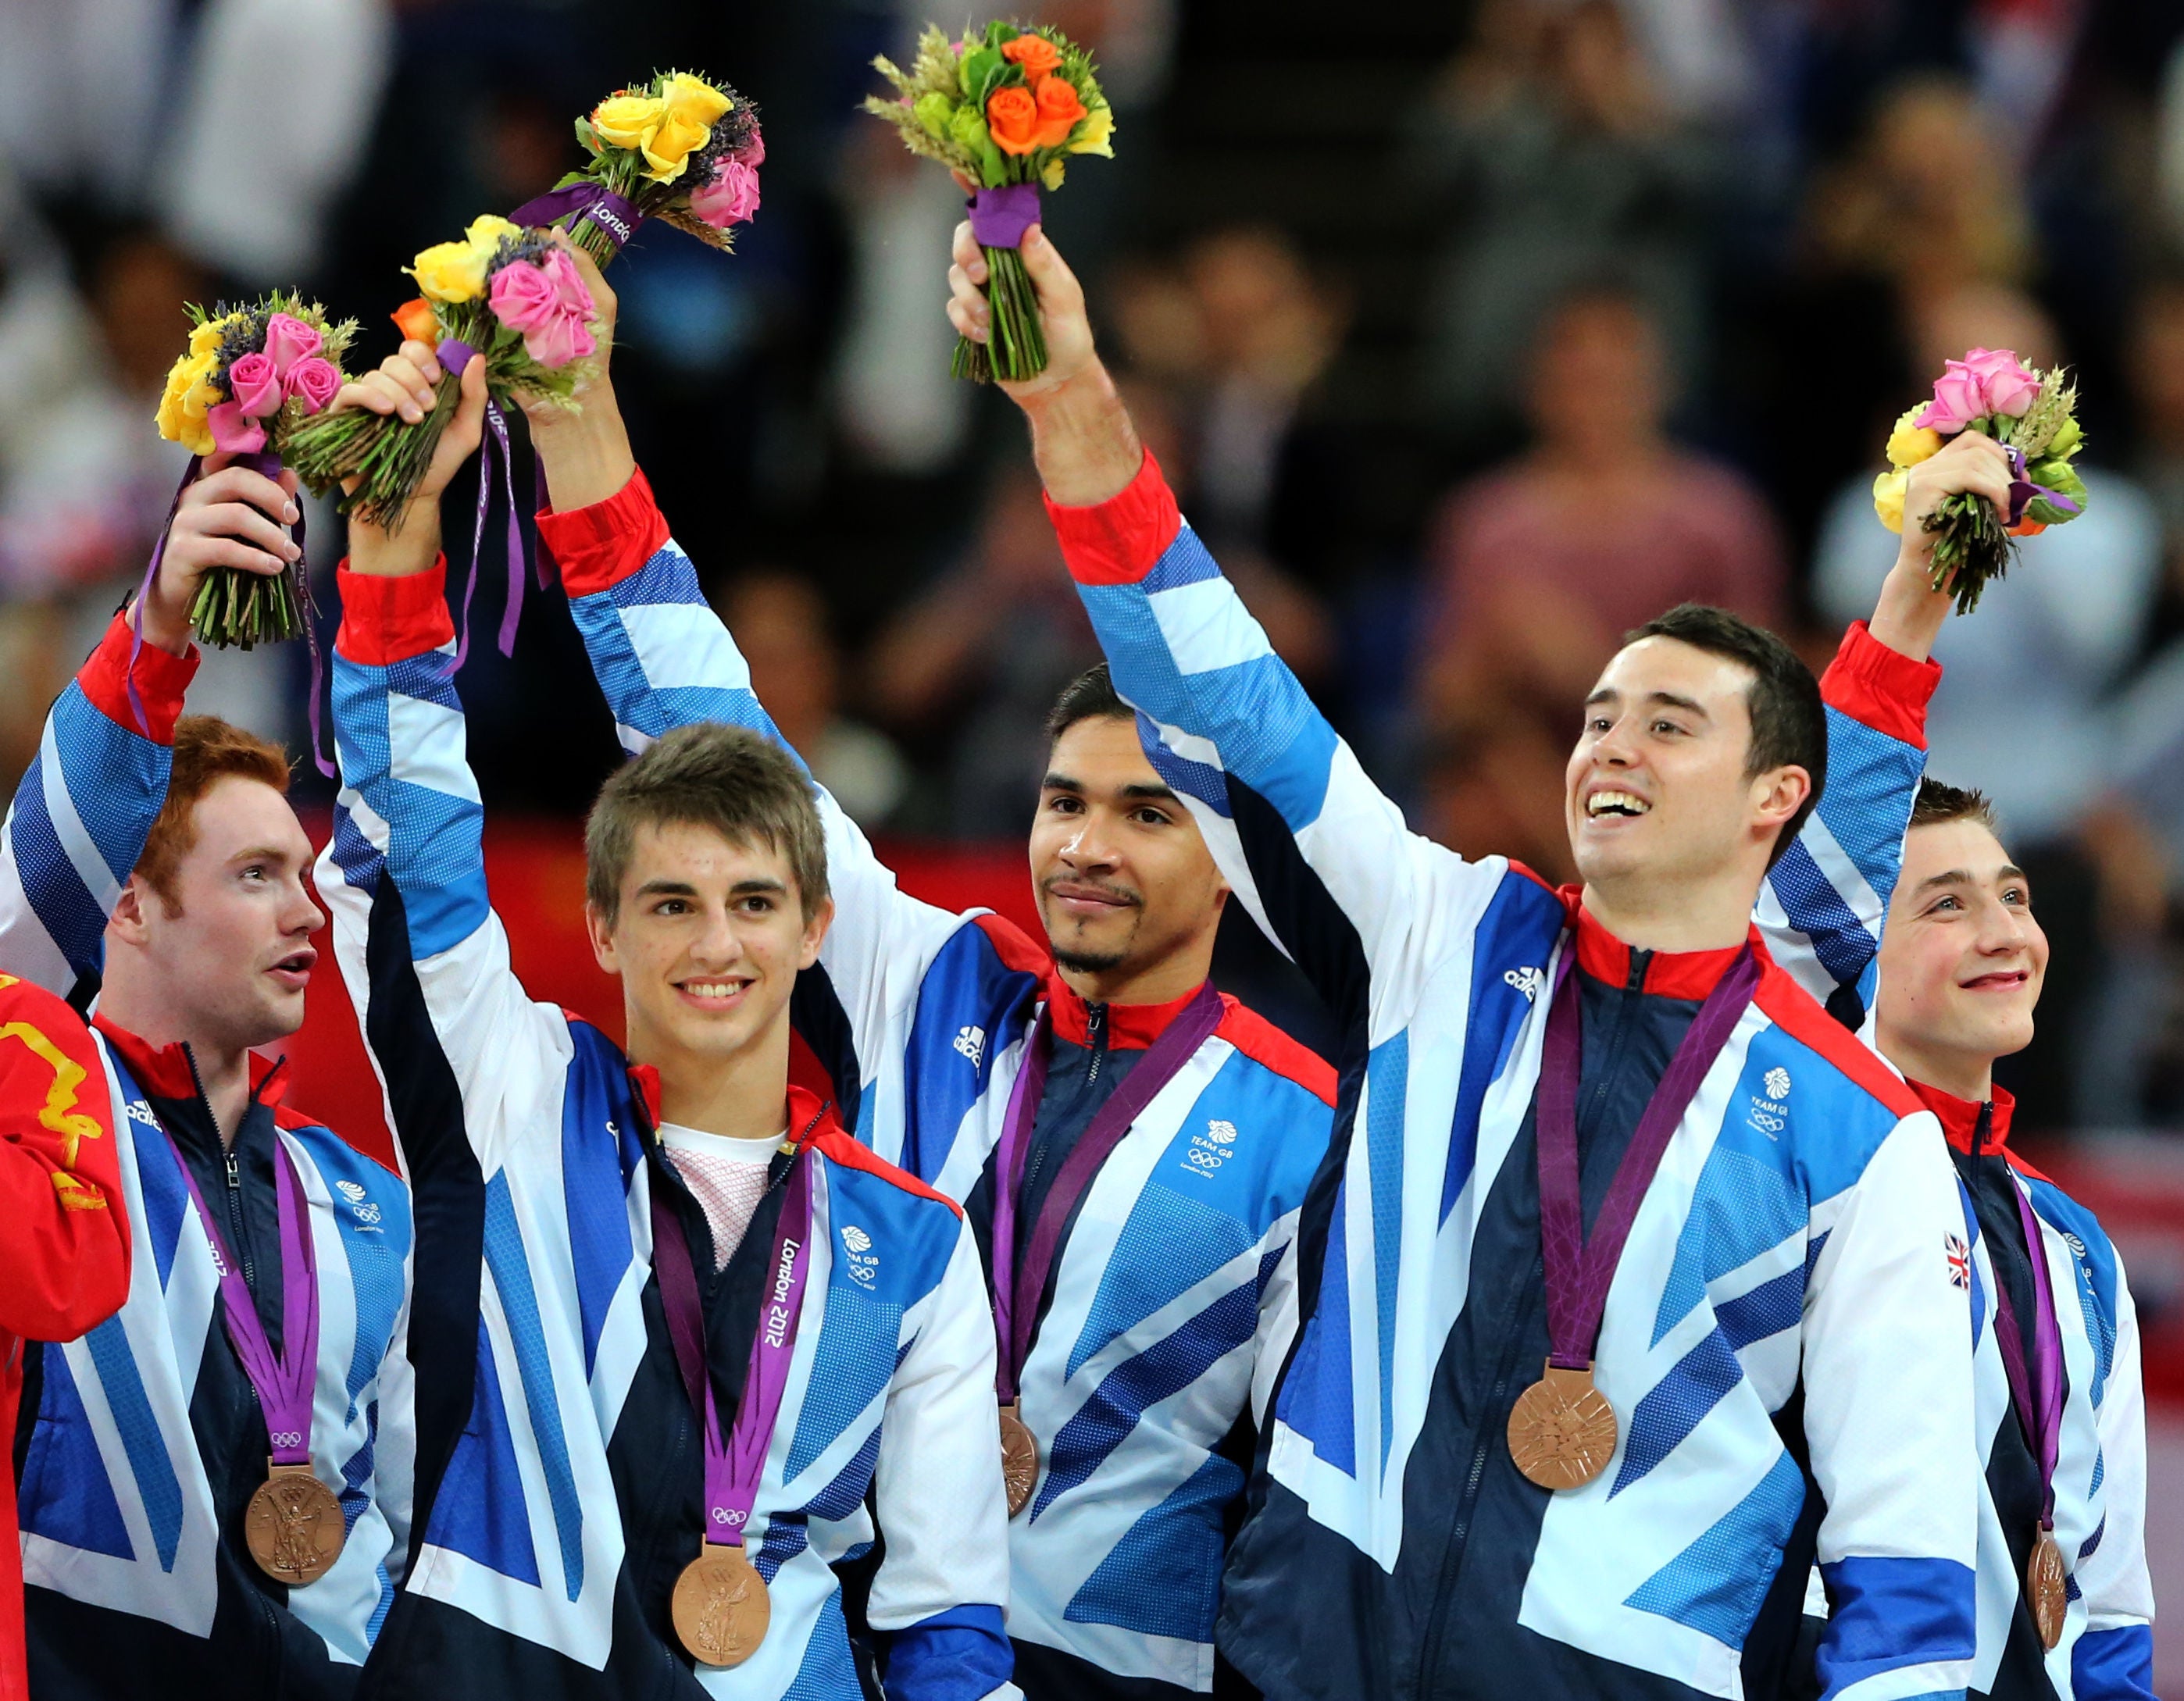 Daniel Purvis (left to right), Max Whitlock, Louis Smith, Kristian Thomas and Sam Oldham won bronze in the gymnastics team final (Andrew Milligan/PA)